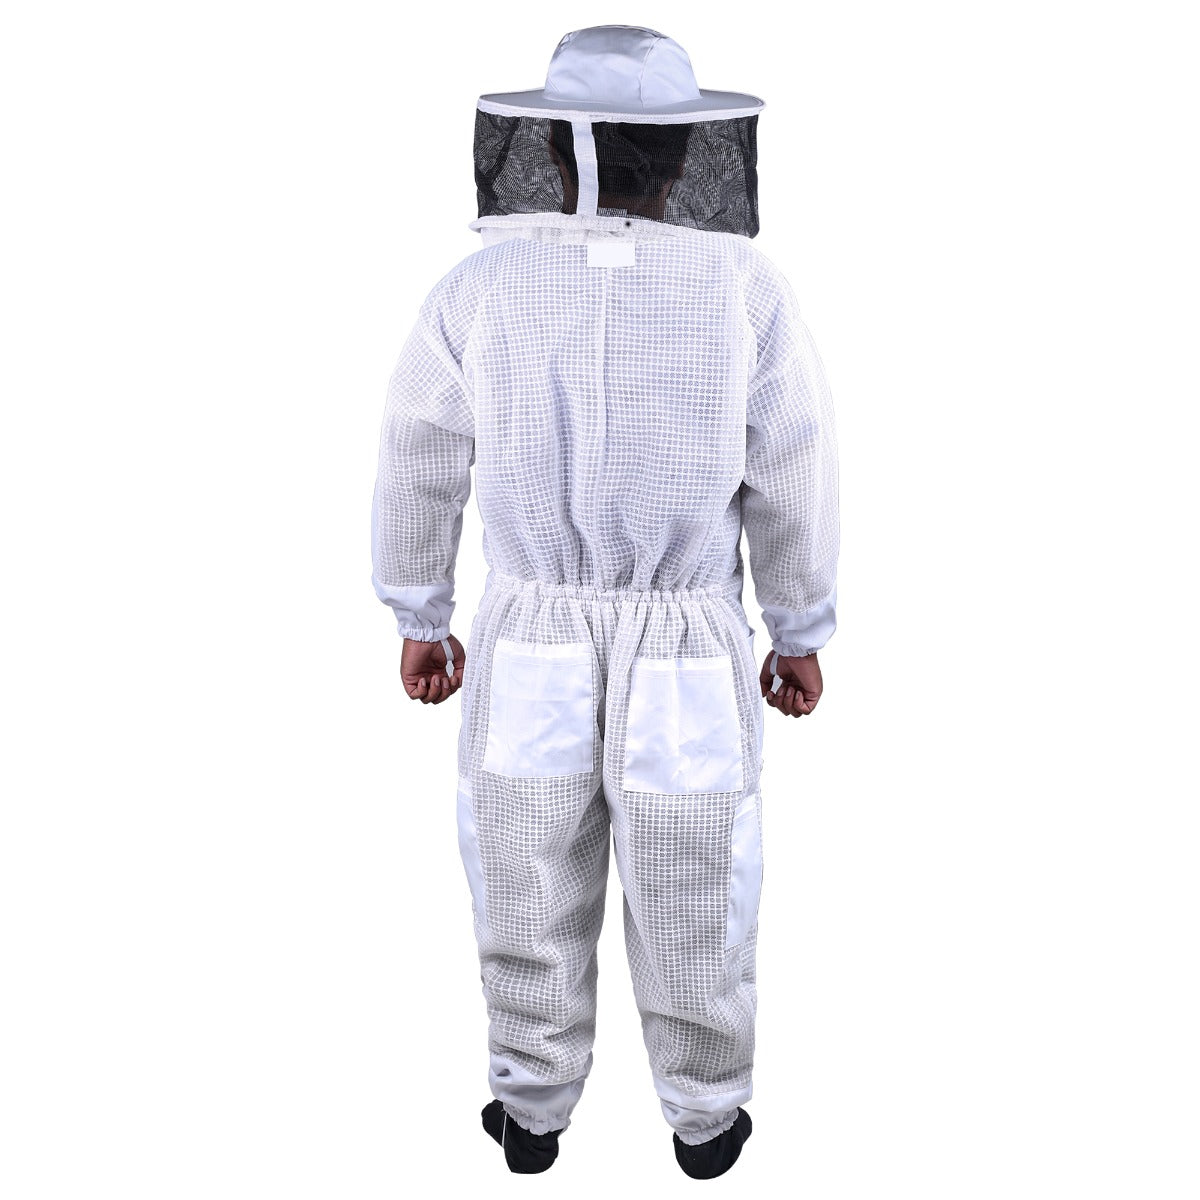 Full Suit 3 Layer Mesh Ultra Cool Ventilated Round Head Beekeeping Protective Gear SIZE M - image3